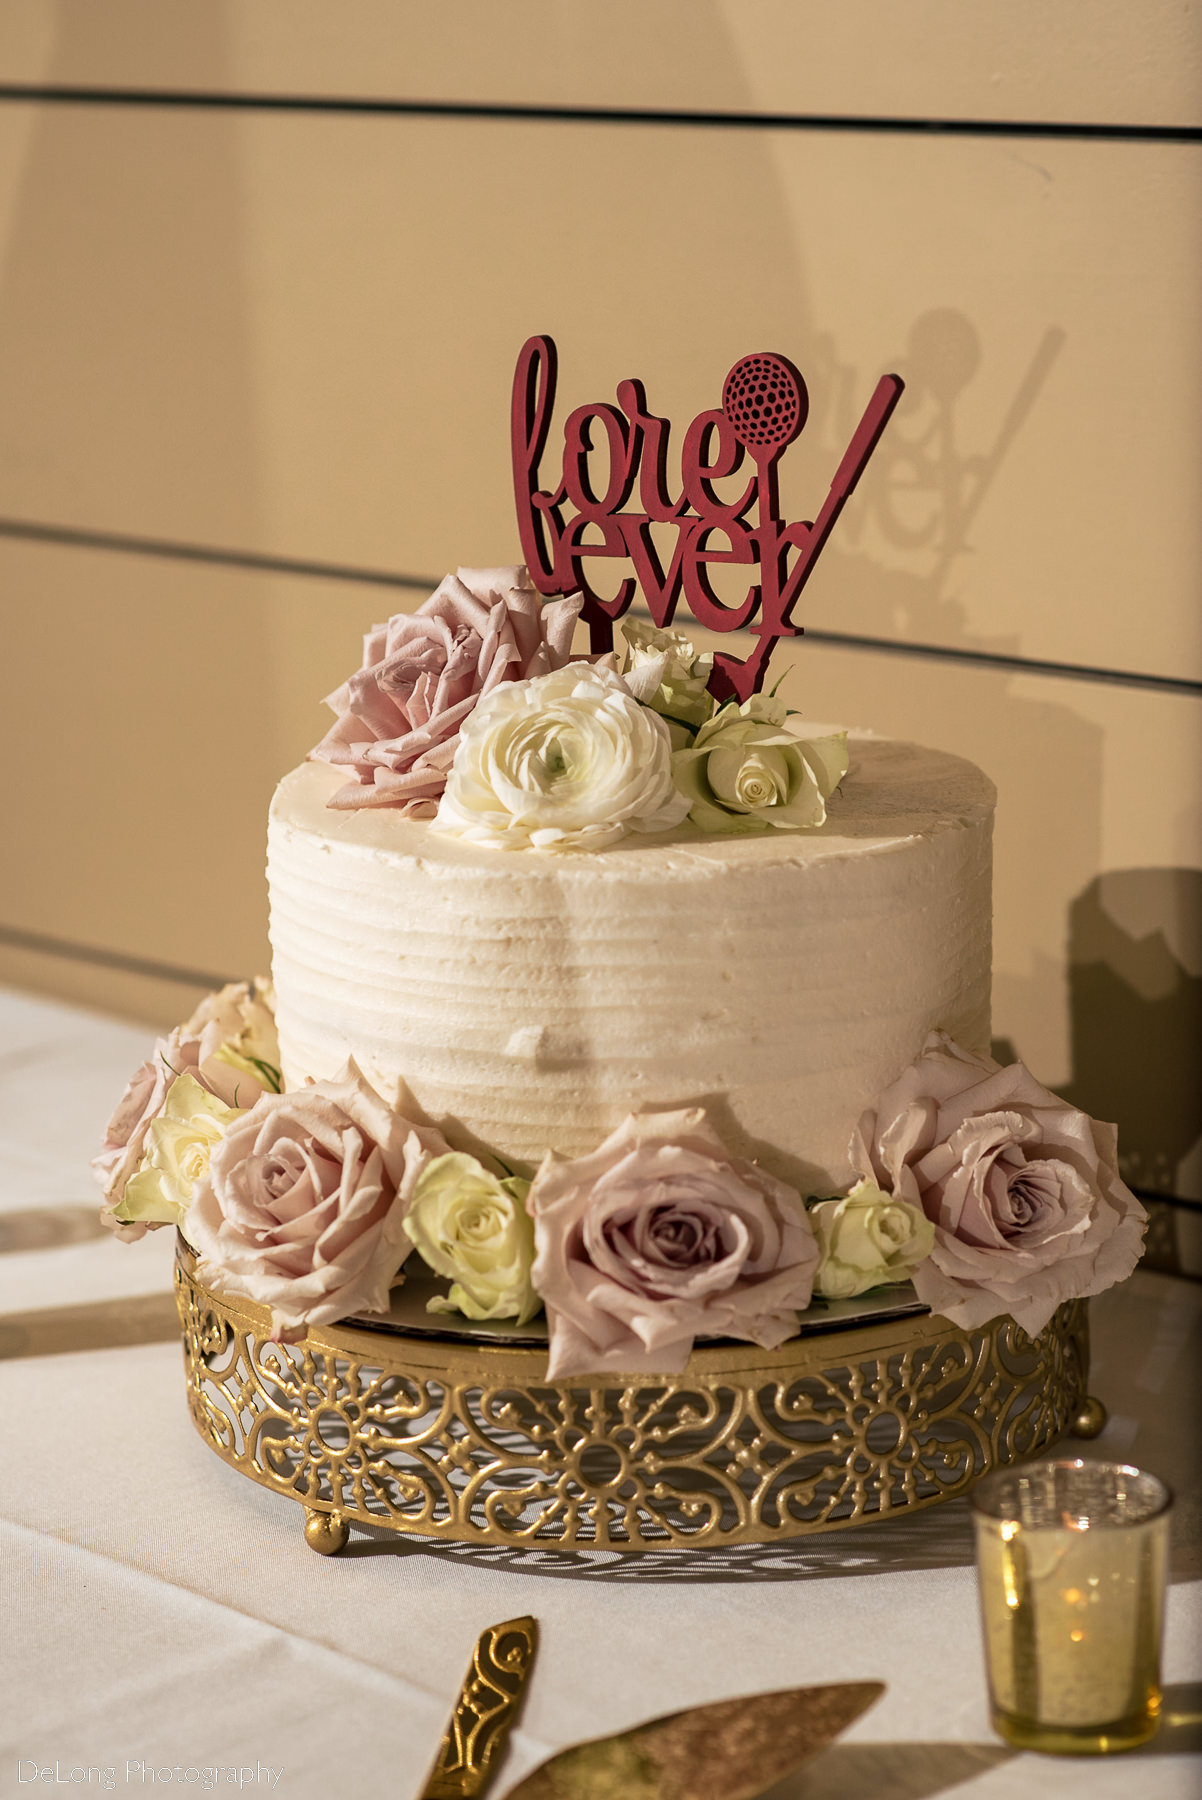 Wedding cake with blush and cream roses and a burgundy cake topper that reads "Fore-ever" with a golf club, ball and tee incorporated into the design by Charlotte wedding Photographers DeLong Photography